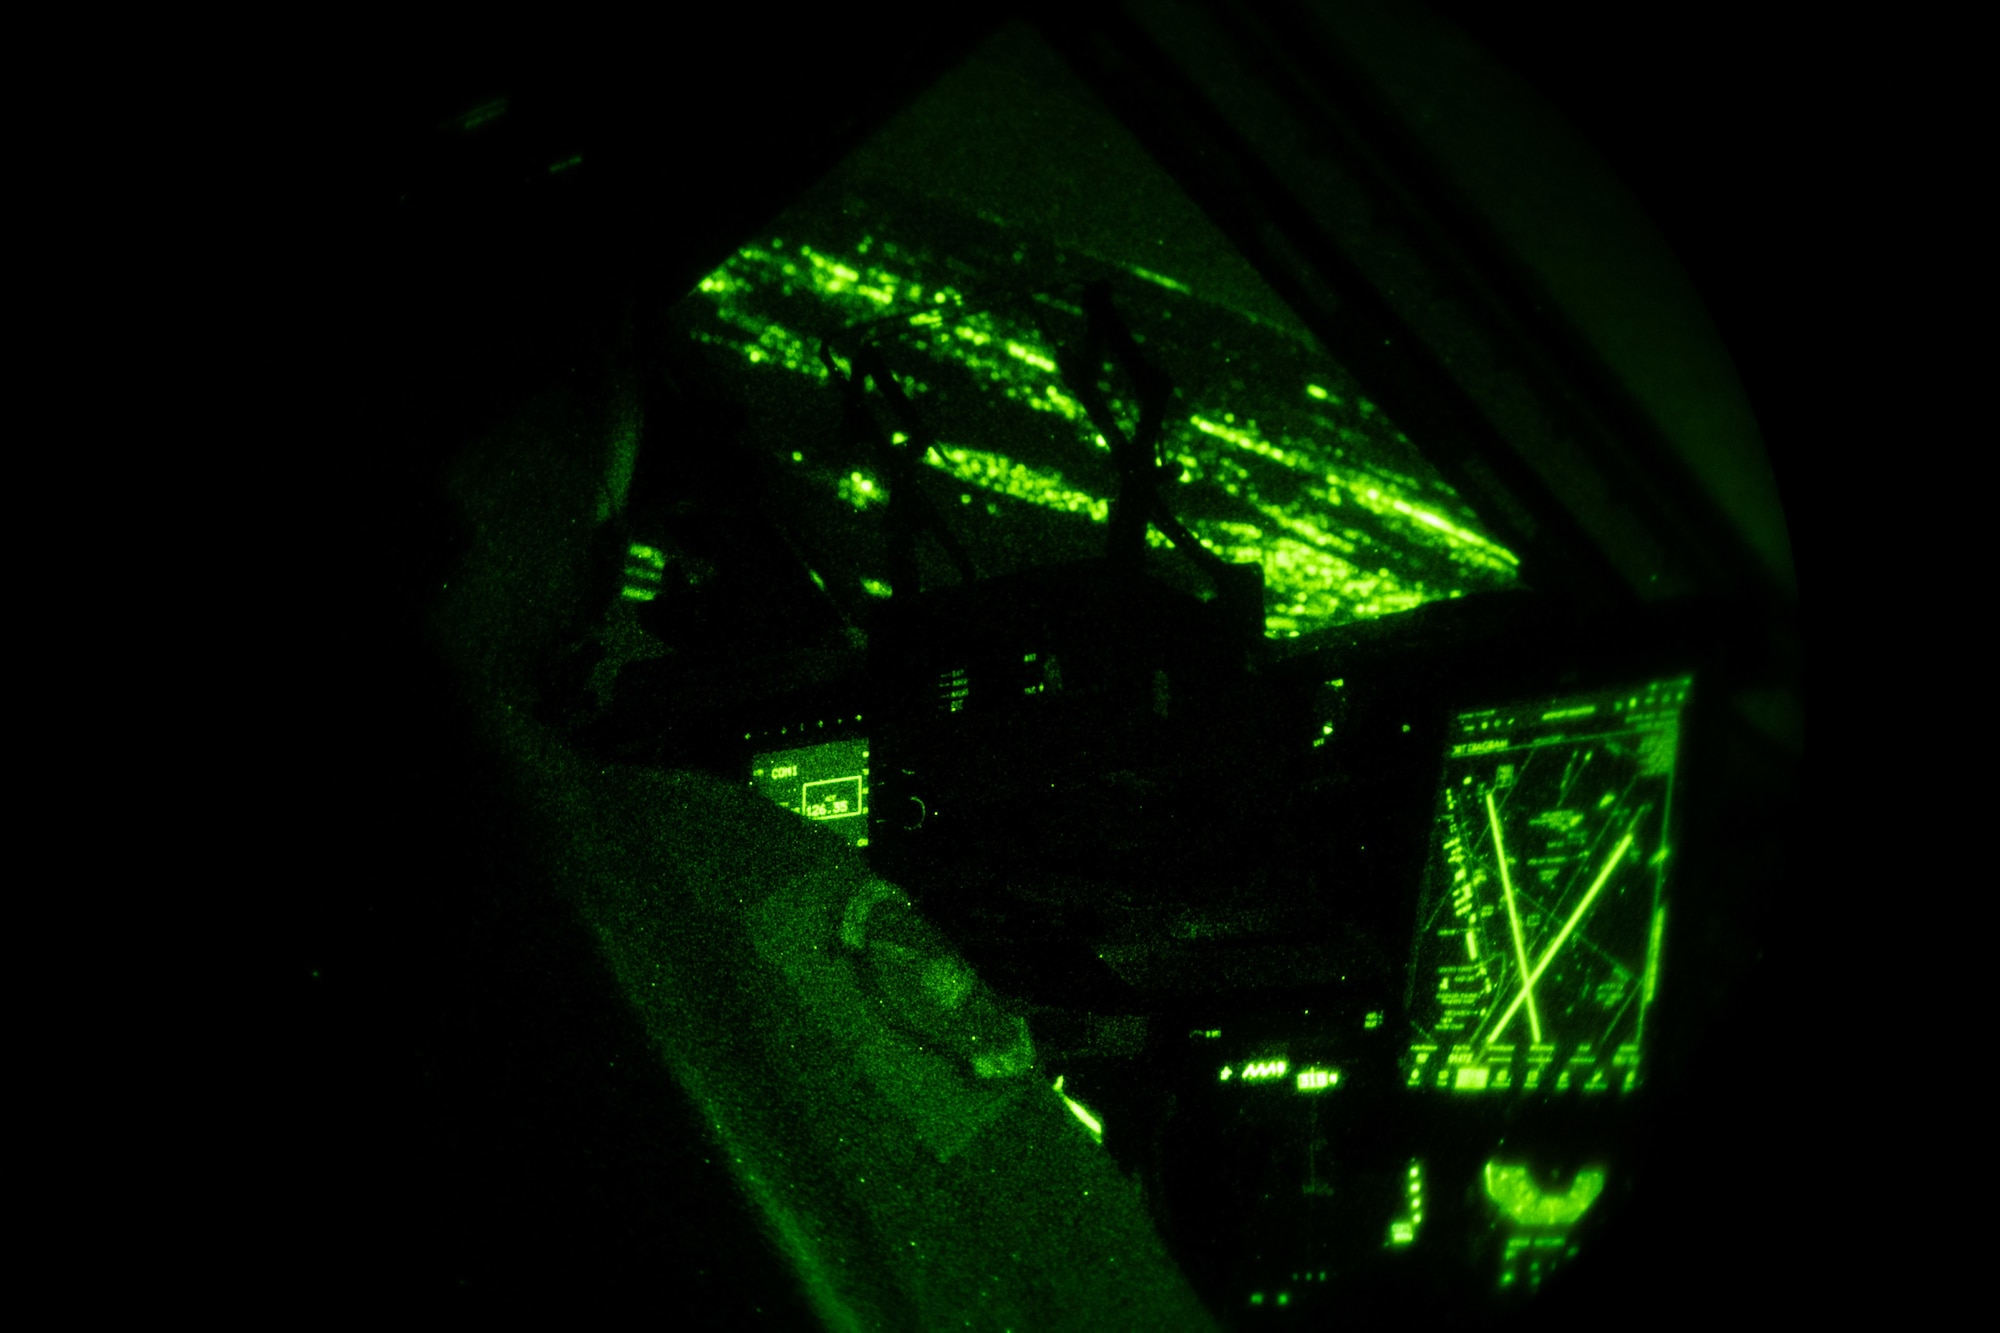 Capt. Corey Landis, 3rd Airlift Squadron instructor pilot, prepares to land a C-17 Globemaster III, while wearing night vision goggles at Dover Air Force Base, Delaware, Jan. 28, 2021. In combat, flying at night without artificial light minimizes visibility of the aircraft and reduces threat from potential enemies. The 3rd AS routinely trains to support global engagement through direct delivery of time-critical theater deployment assets and ensure aircrew operational readiness. (U.S. Air Force photo by Airman 1st Class Faith Schaefer)